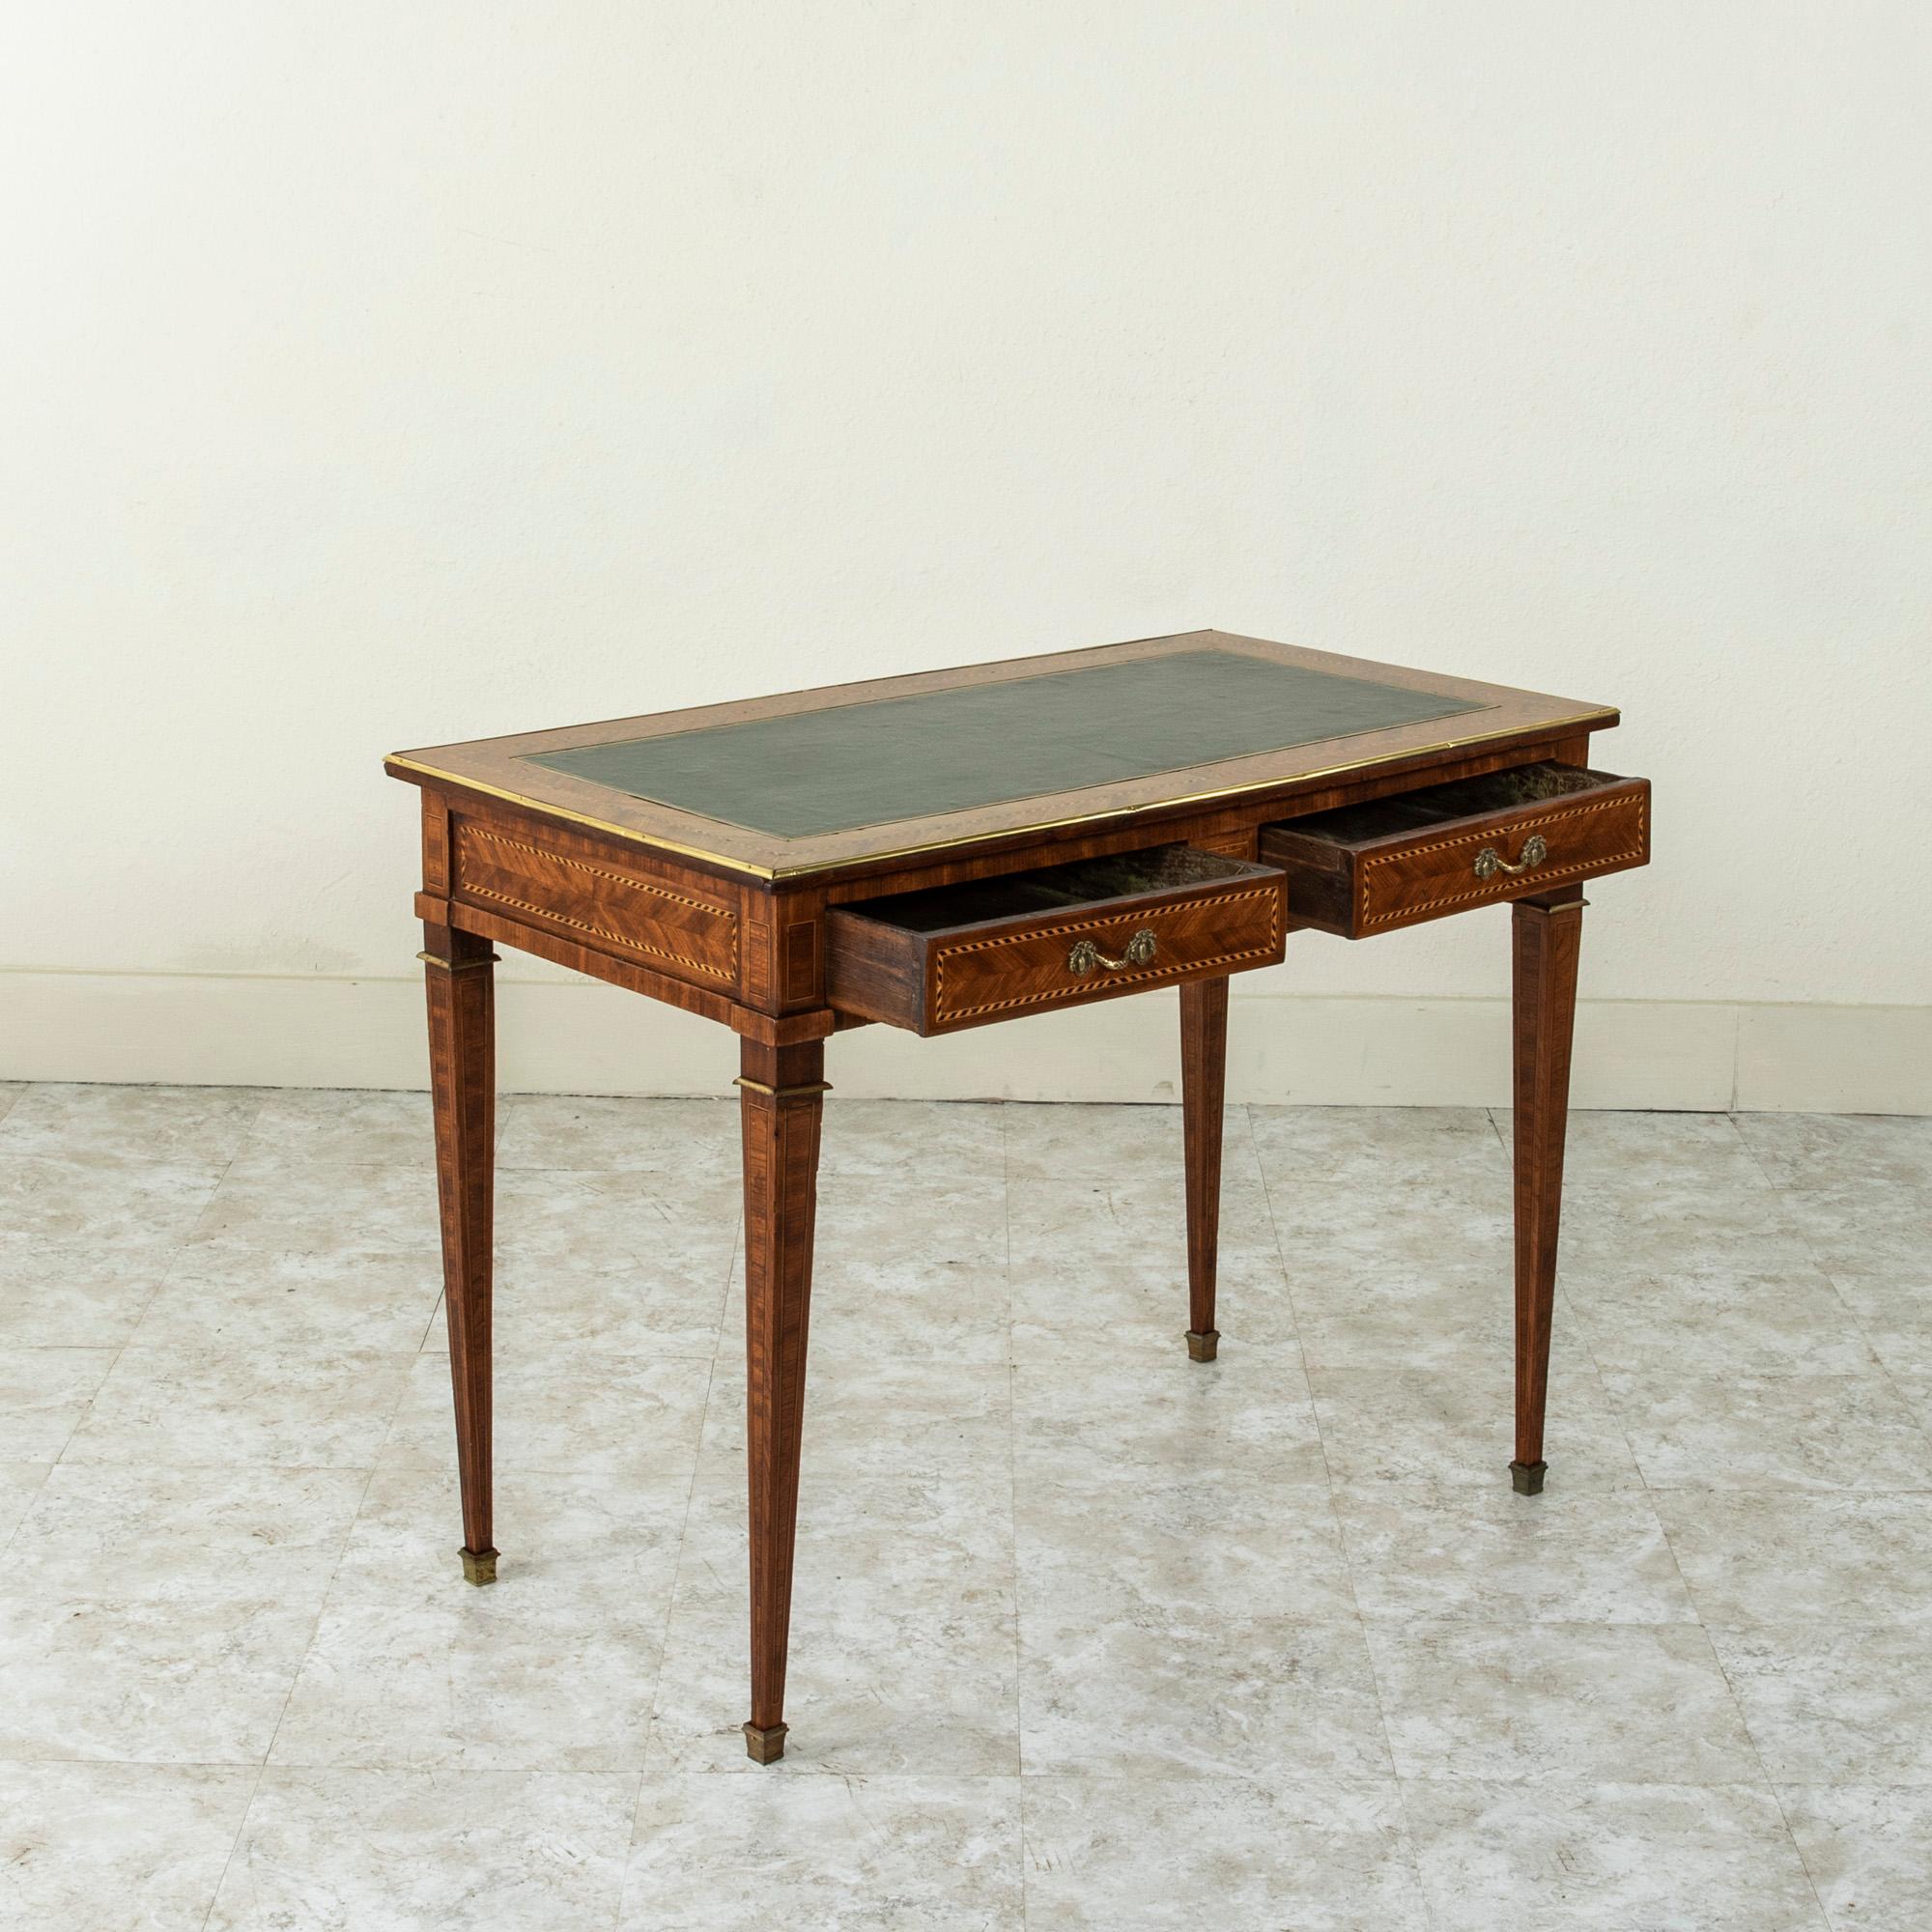 Late 18th Century French Louis XVI Period Marquetry Desk with Leather Top 2